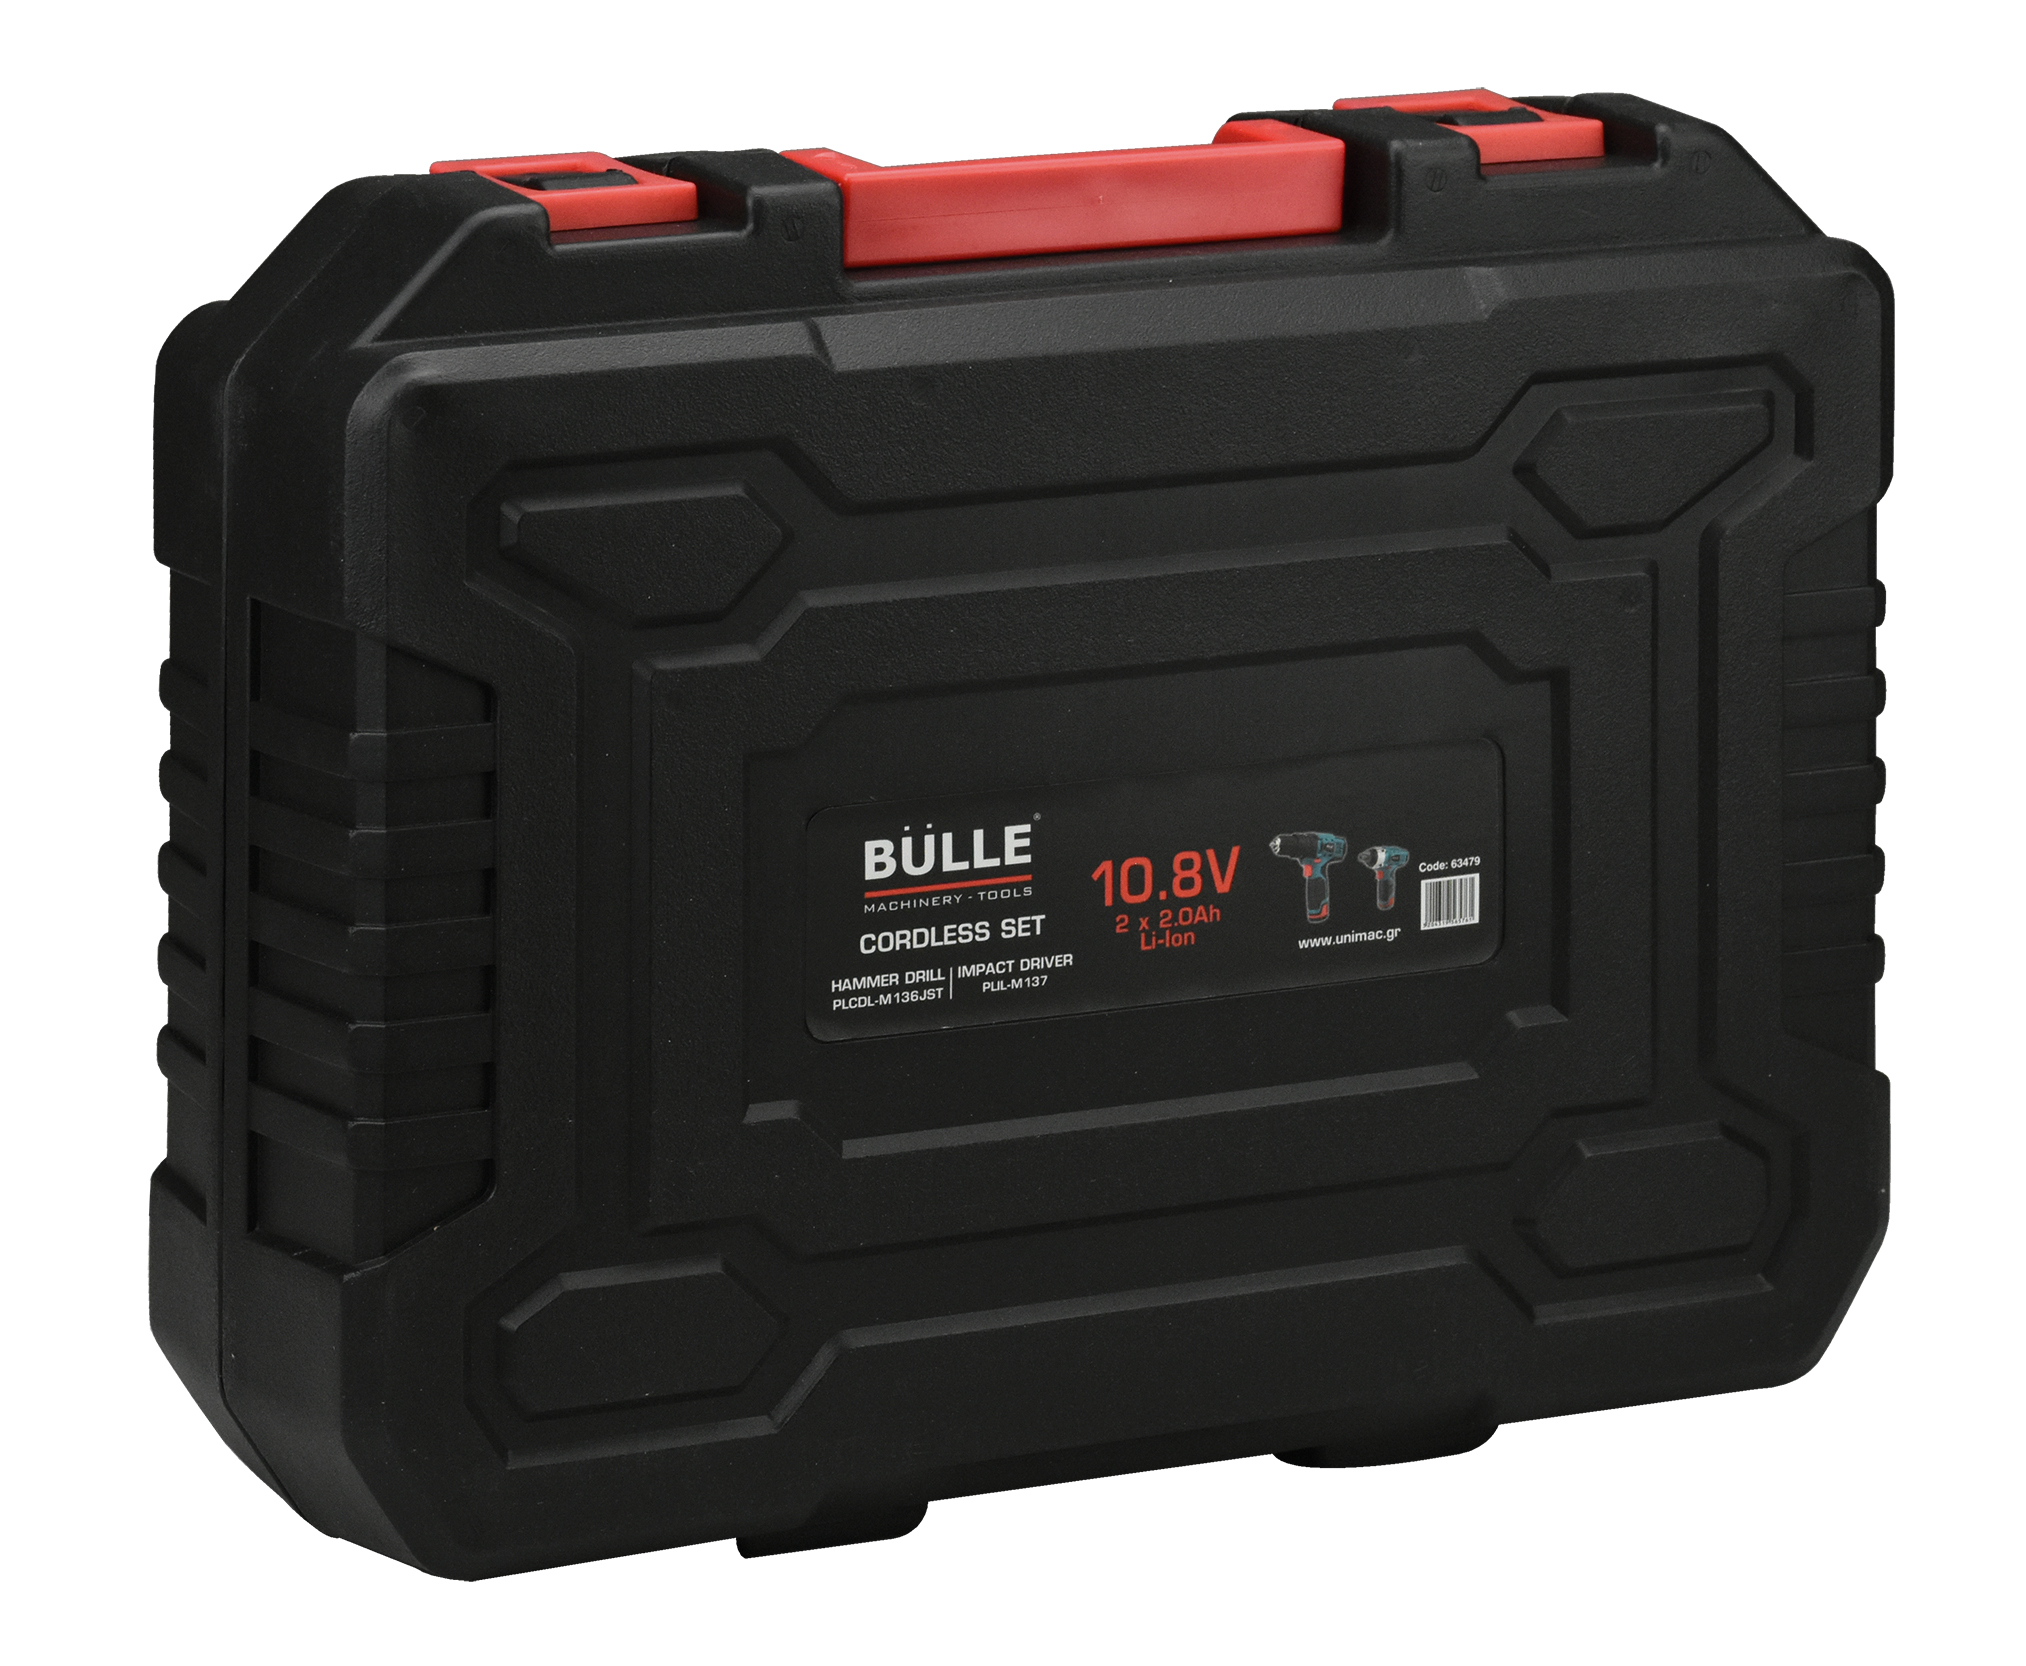 Lithium Hammer Drill and Screwdriver Set 10.8V Bulle - 2